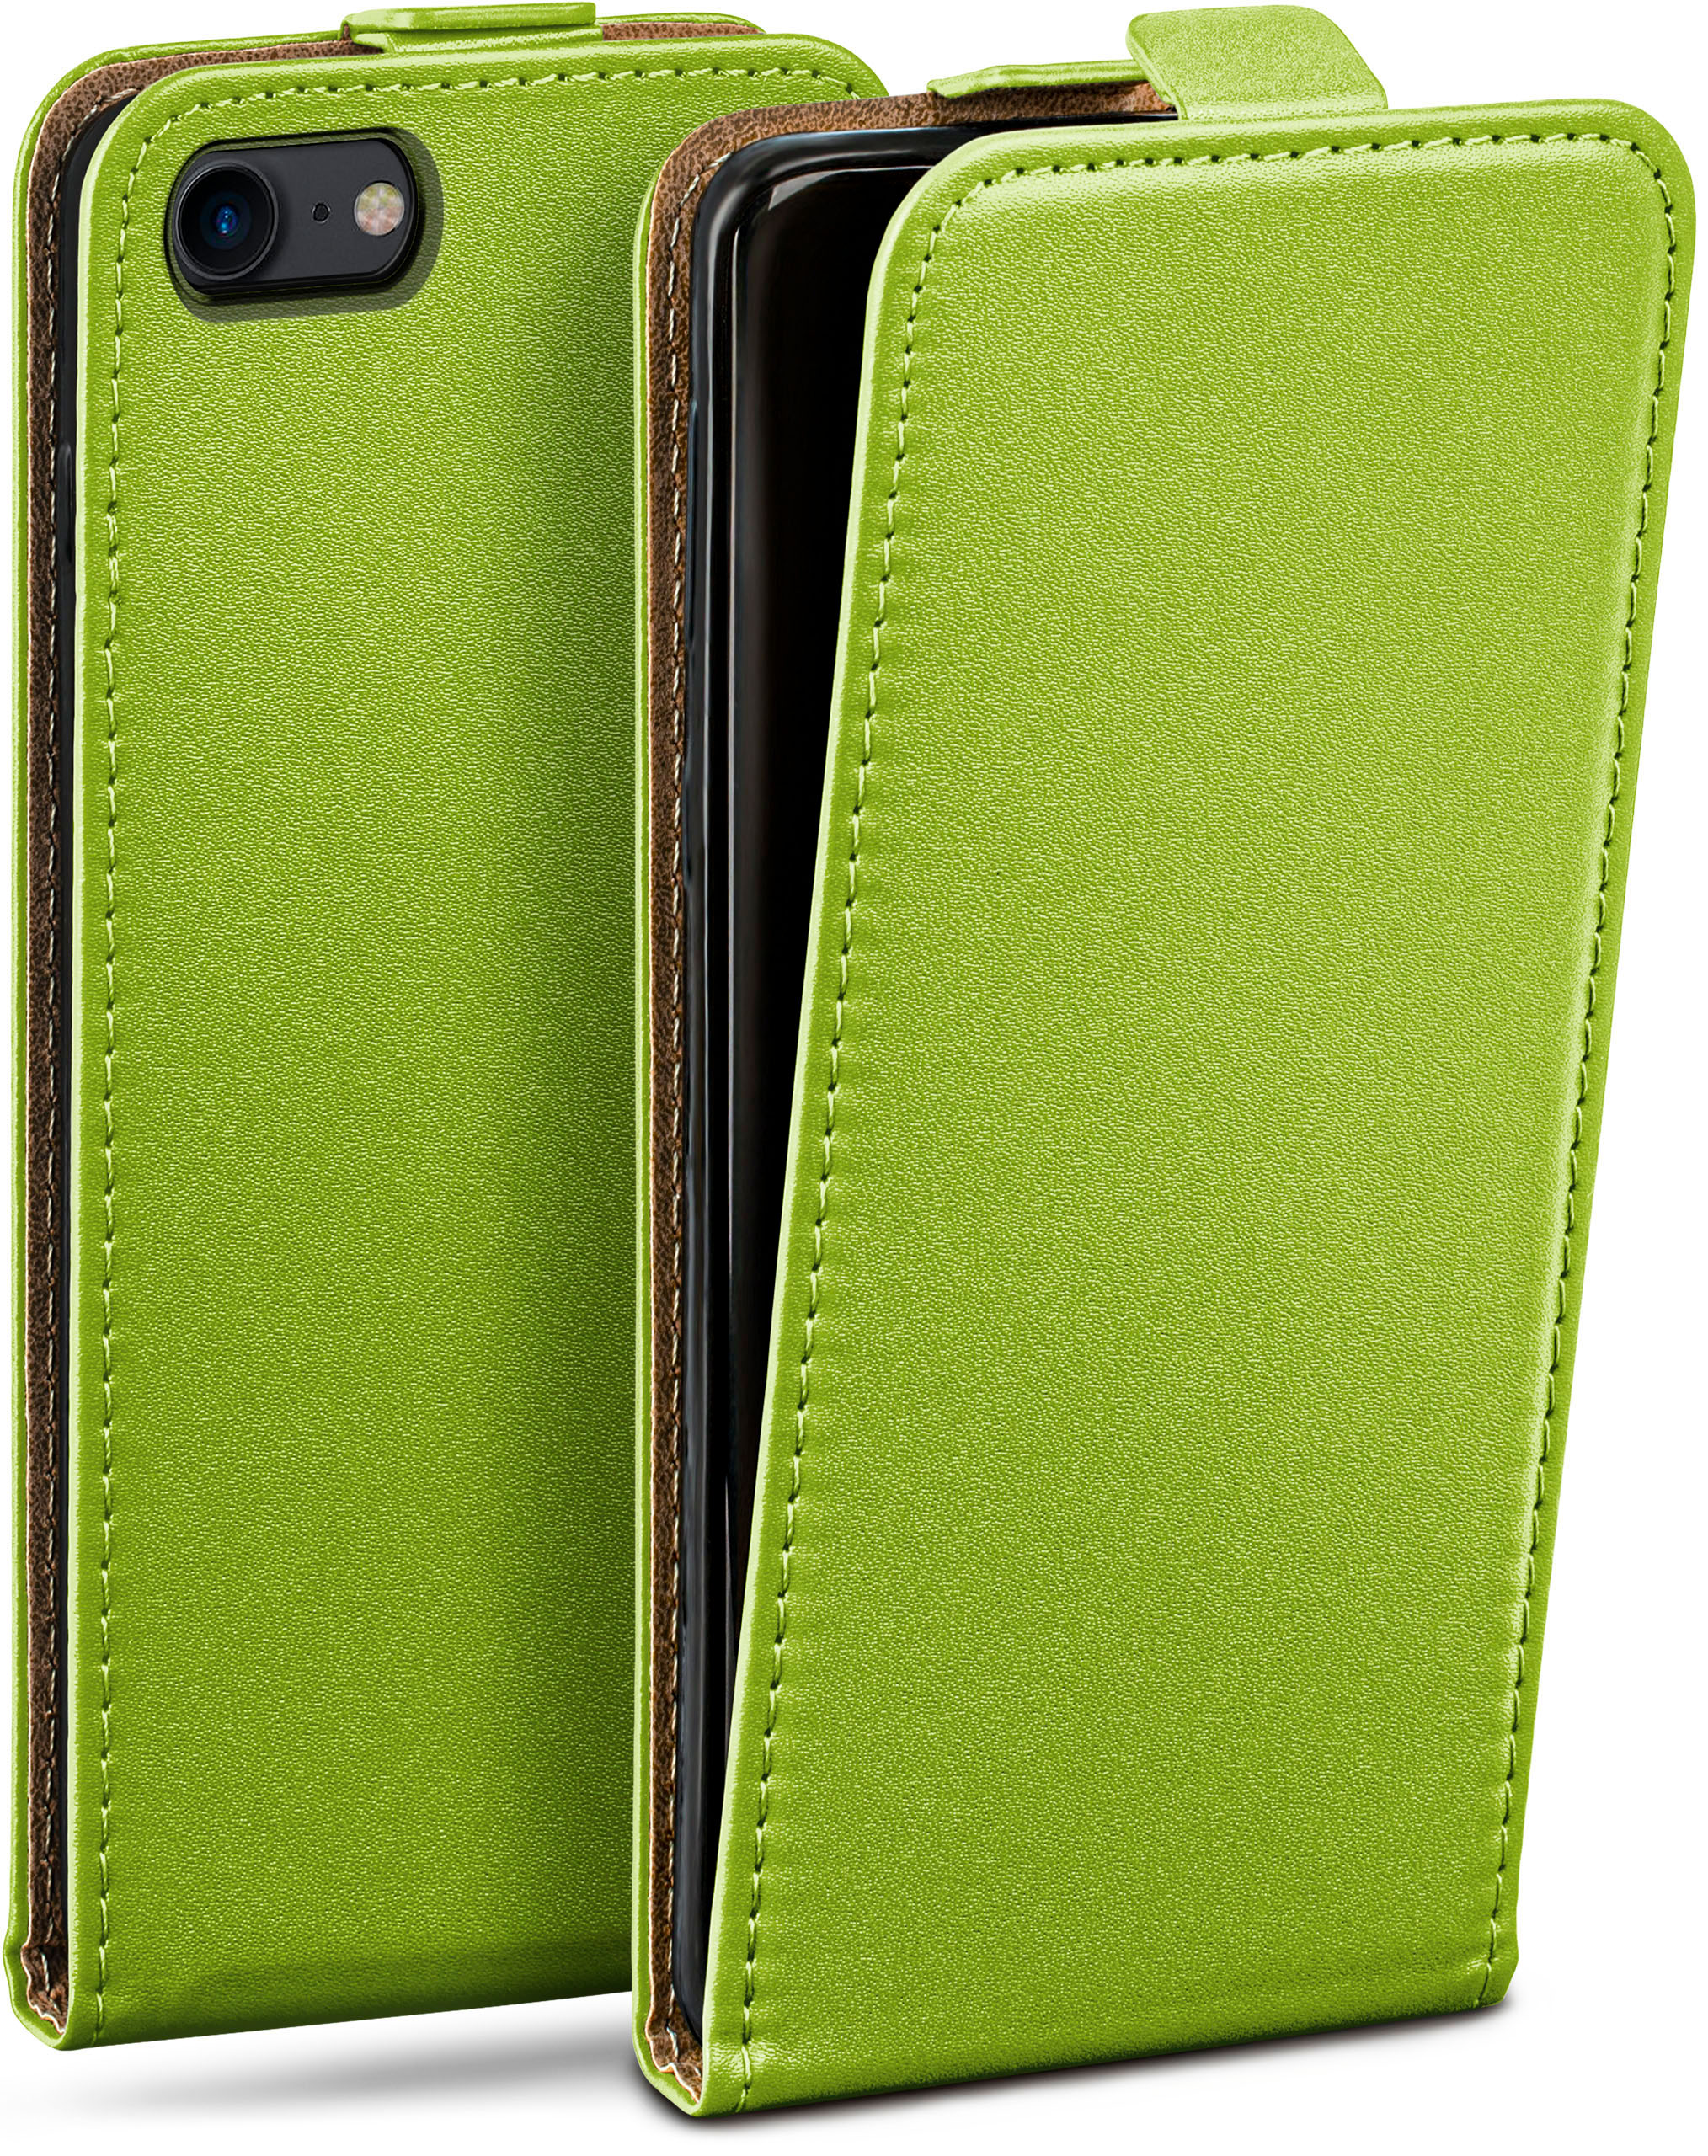 Flip Lime-Green iPhone 7 8, Case, MOEX Flip Cover, iPhone Apple, /